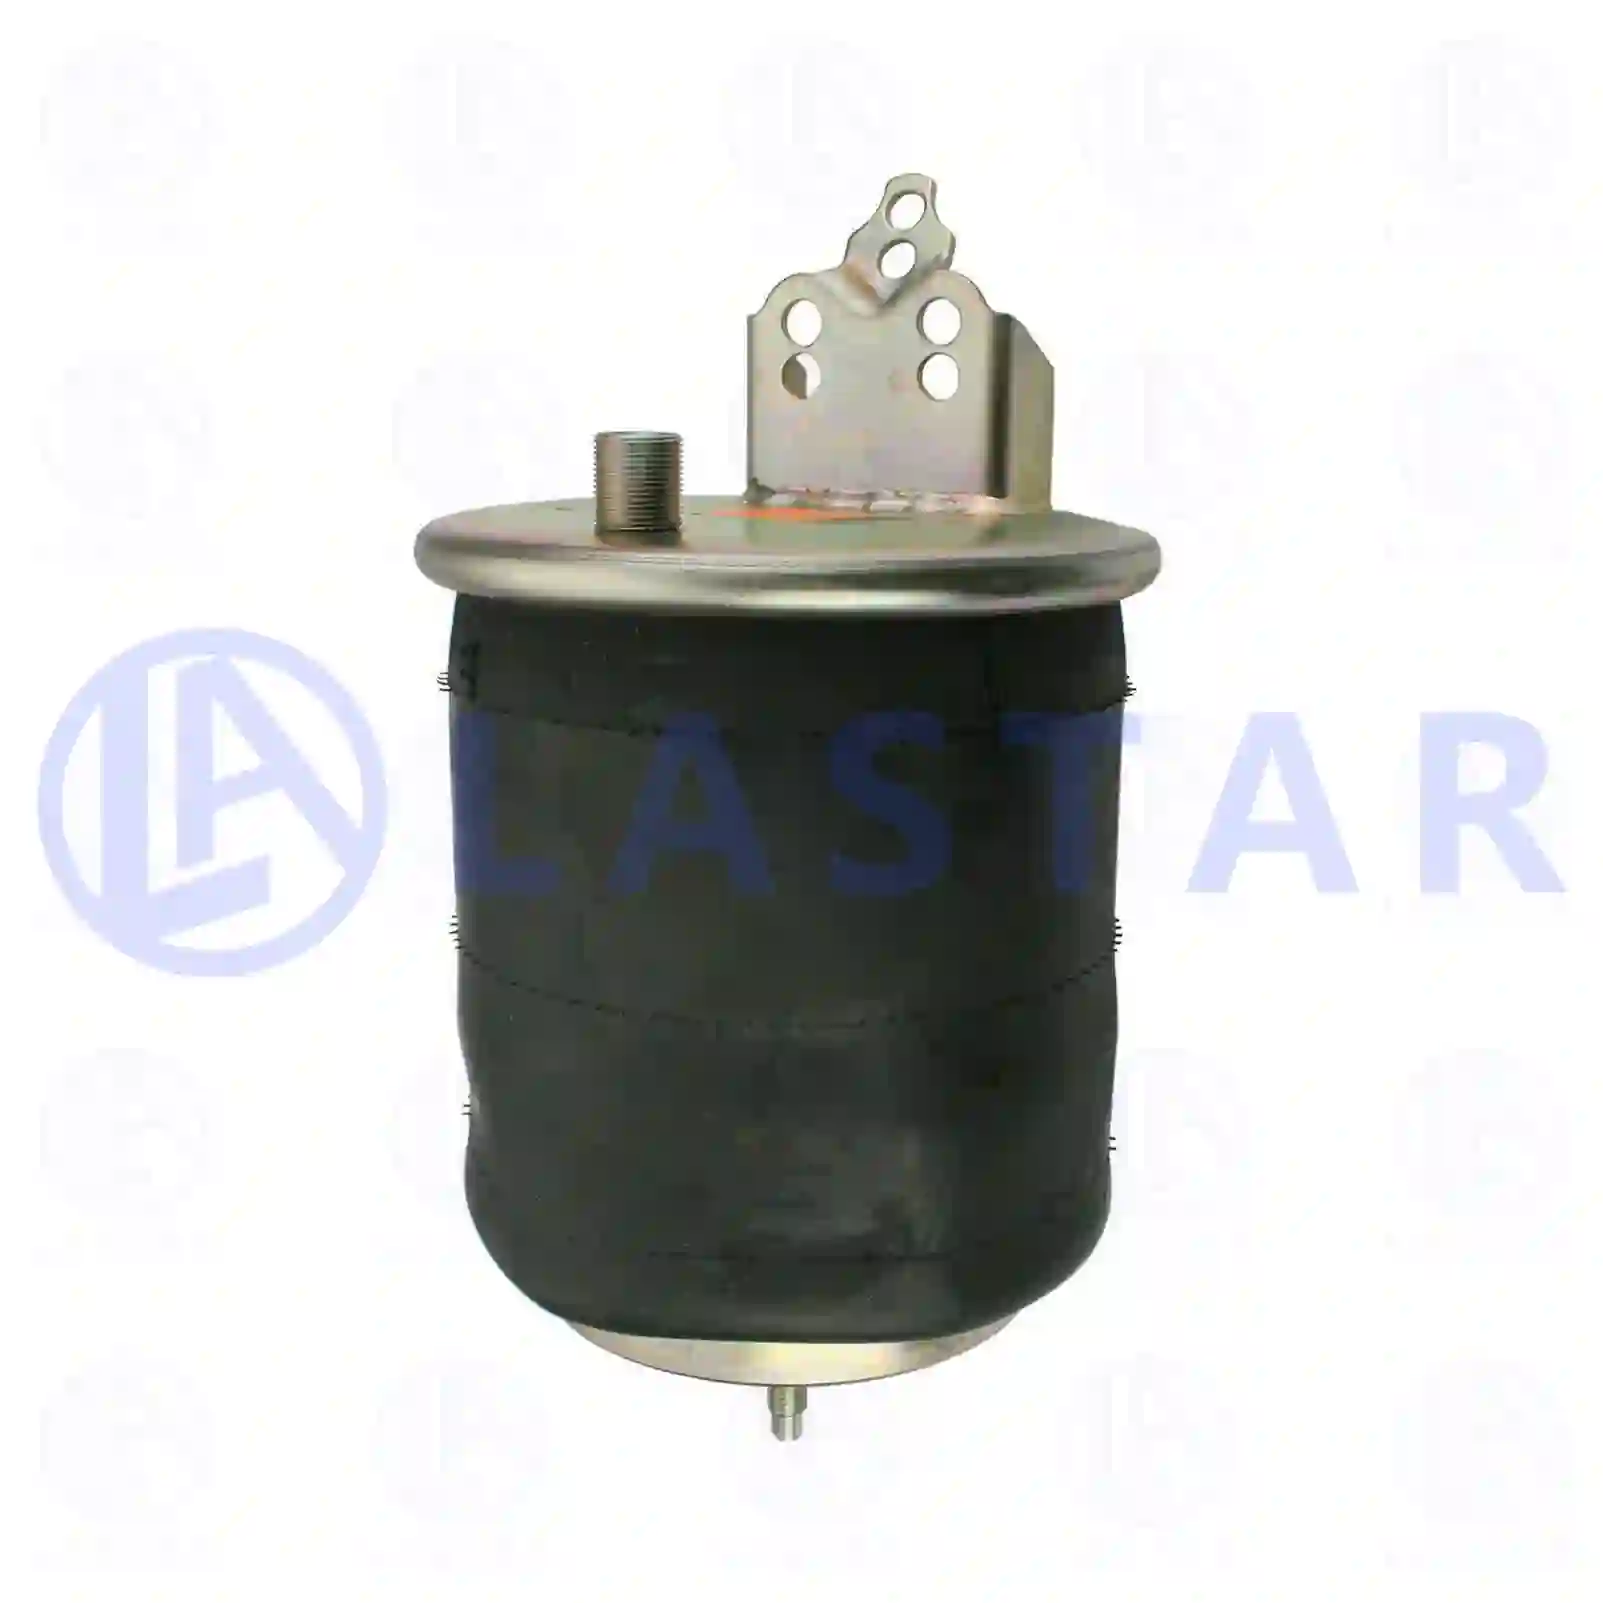 Air spring, with steel piston, 77729664, 1076420, 20374512, 20456160, 20531989, 20582213, 21961448, ZG40761-0008 ||  77729664 Lastar Spare Part | Truck Spare Parts, Auotomotive Spare Parts Air spring, with steel piston, 77729664, 1076420, 20374512, 20456160, 20531989, 20582213, 21961448, ZG40761-0008 ||  77729664 Lastar Spare Part | Truck Spare Parts, Auotomotive Spare Parts